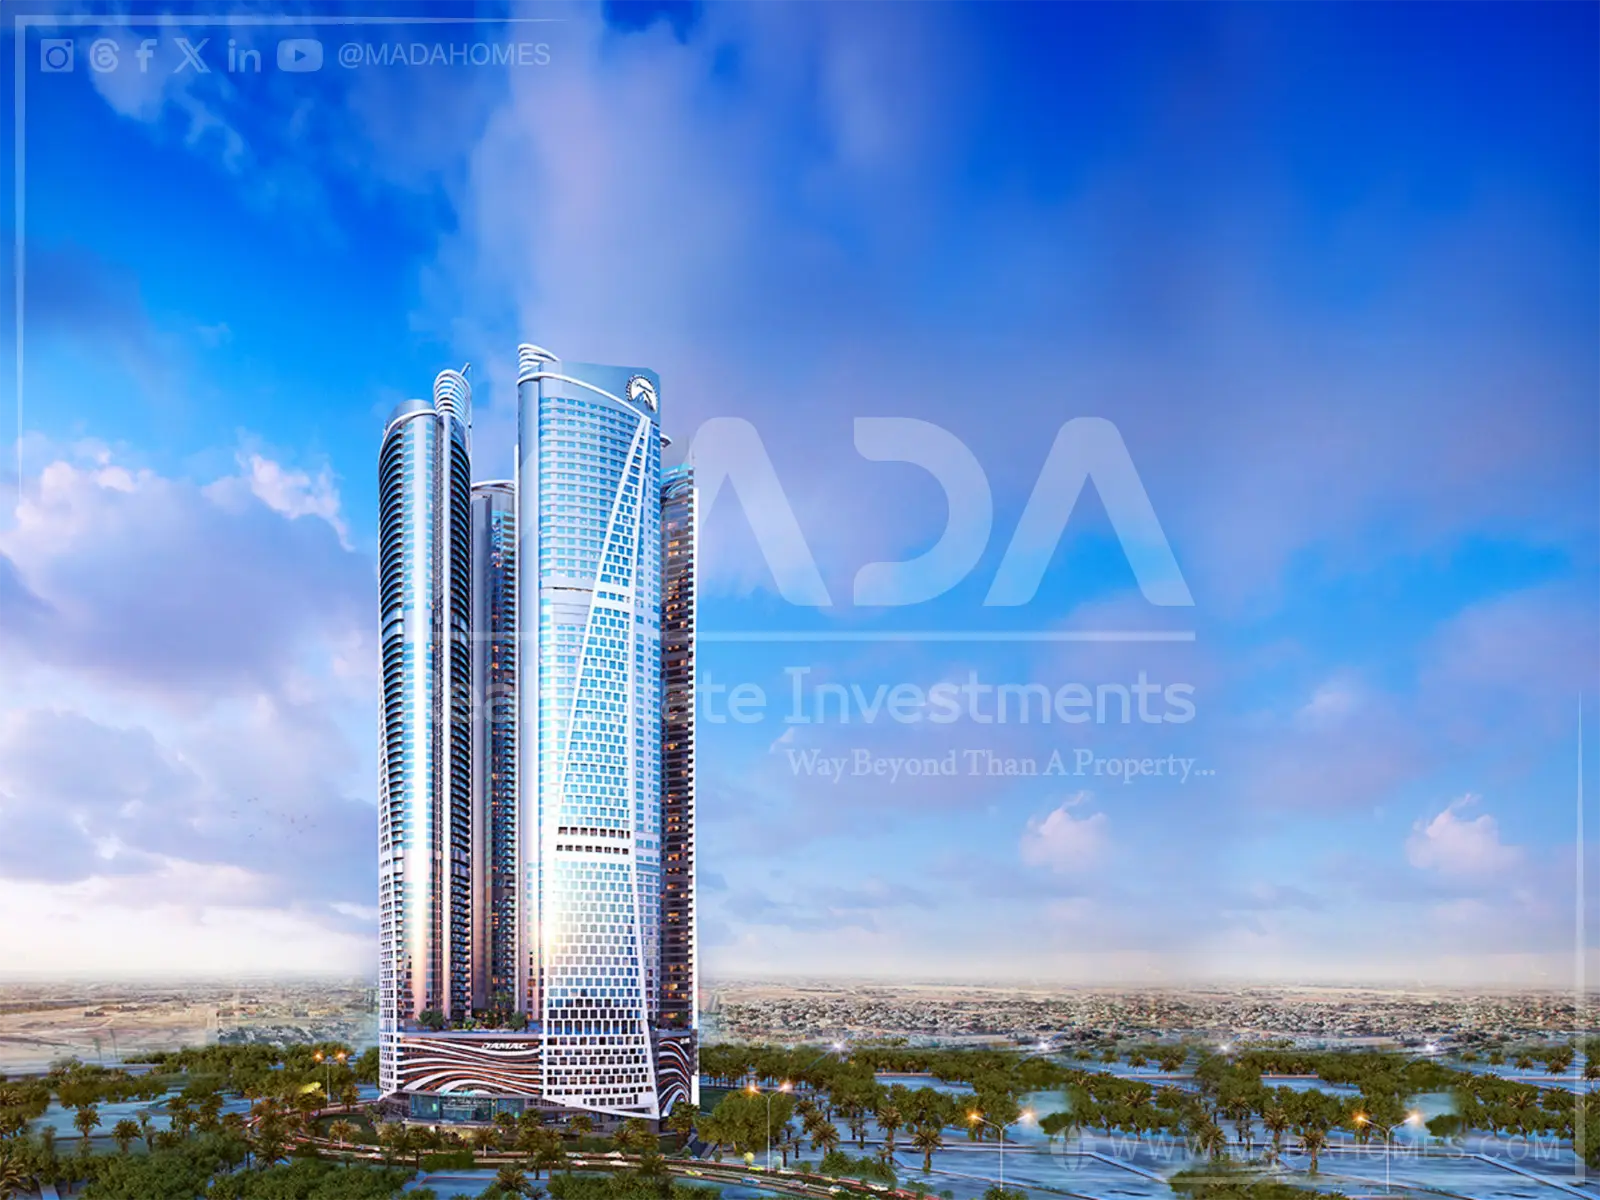 Who is the owner of Damac Properties?